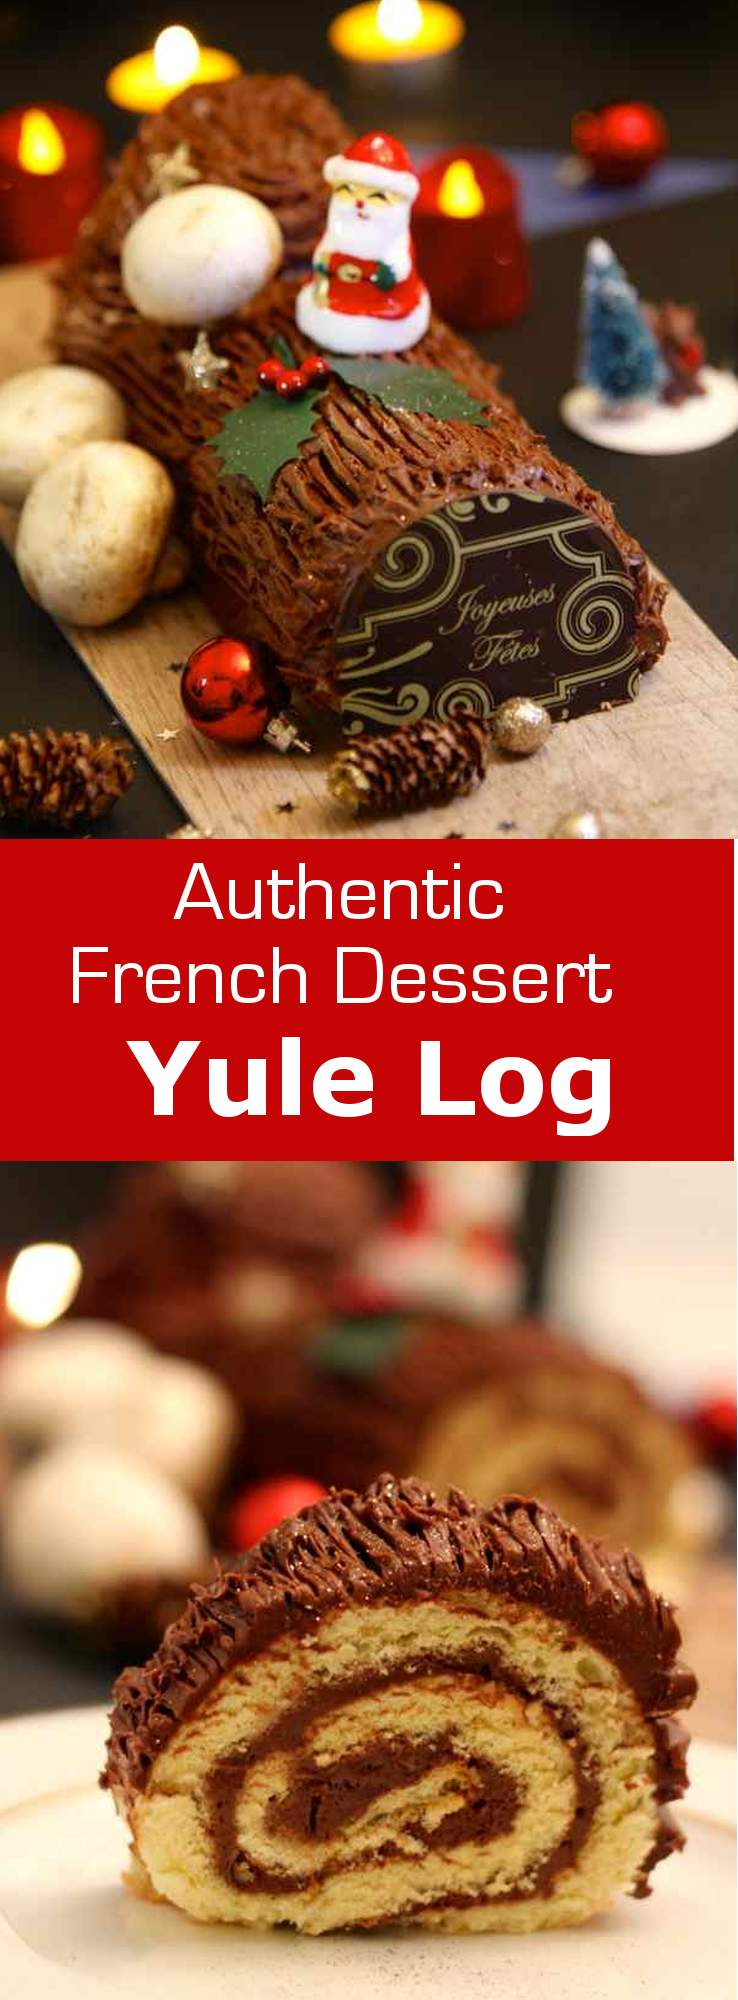 Traditional French Christmas Desserts
 Chocolate Yule Log Authentic French Recipe